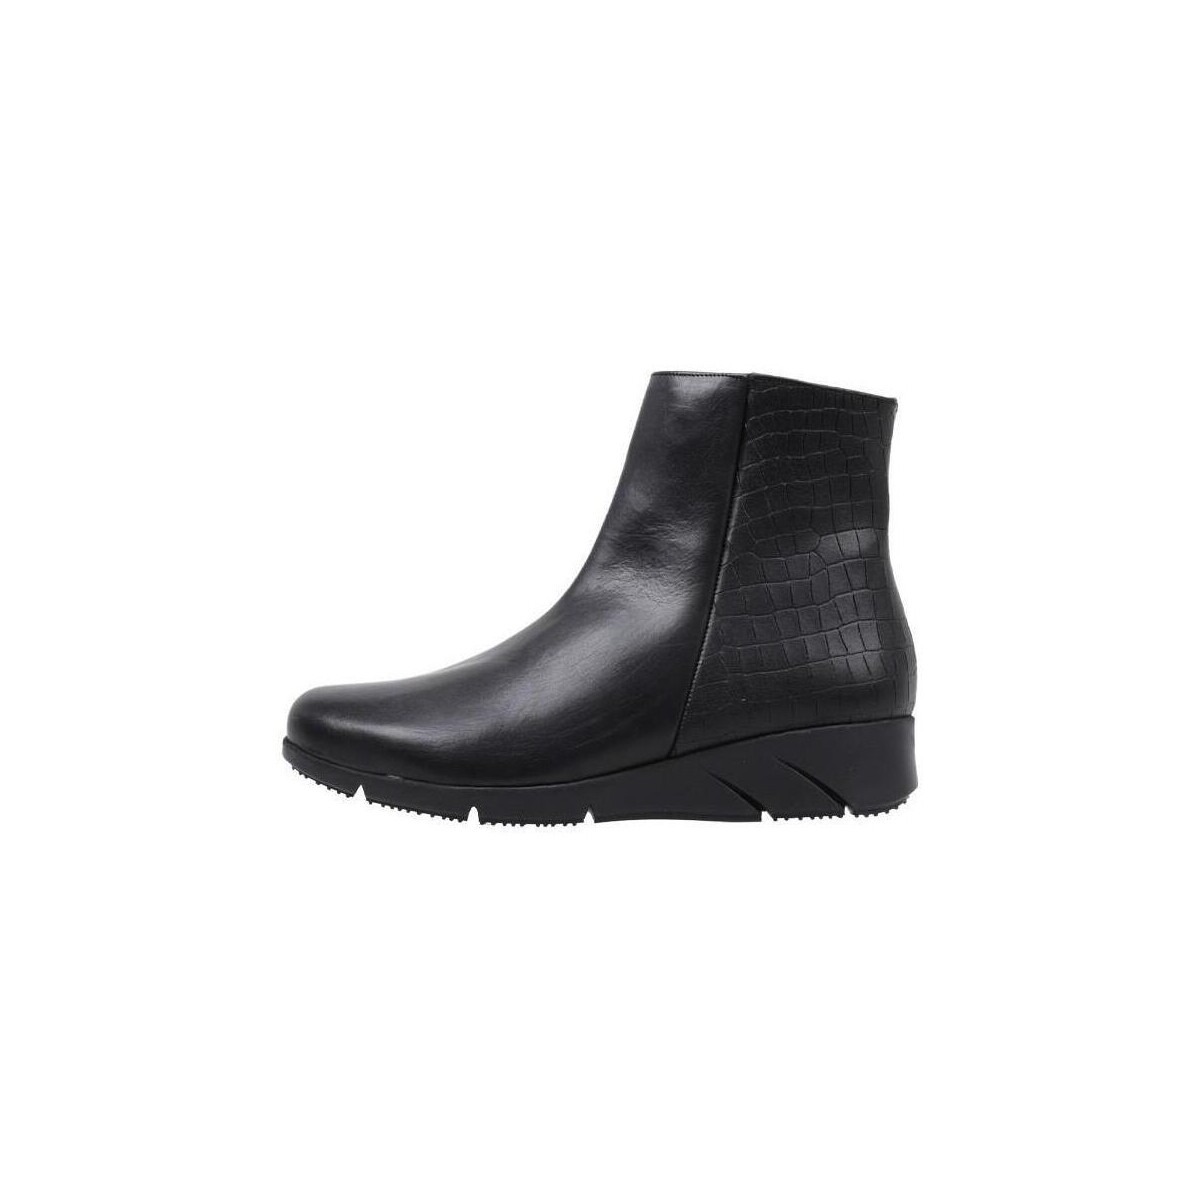 Amanda - Woman Ankle Boots in Black at Spartoo GOOFASH